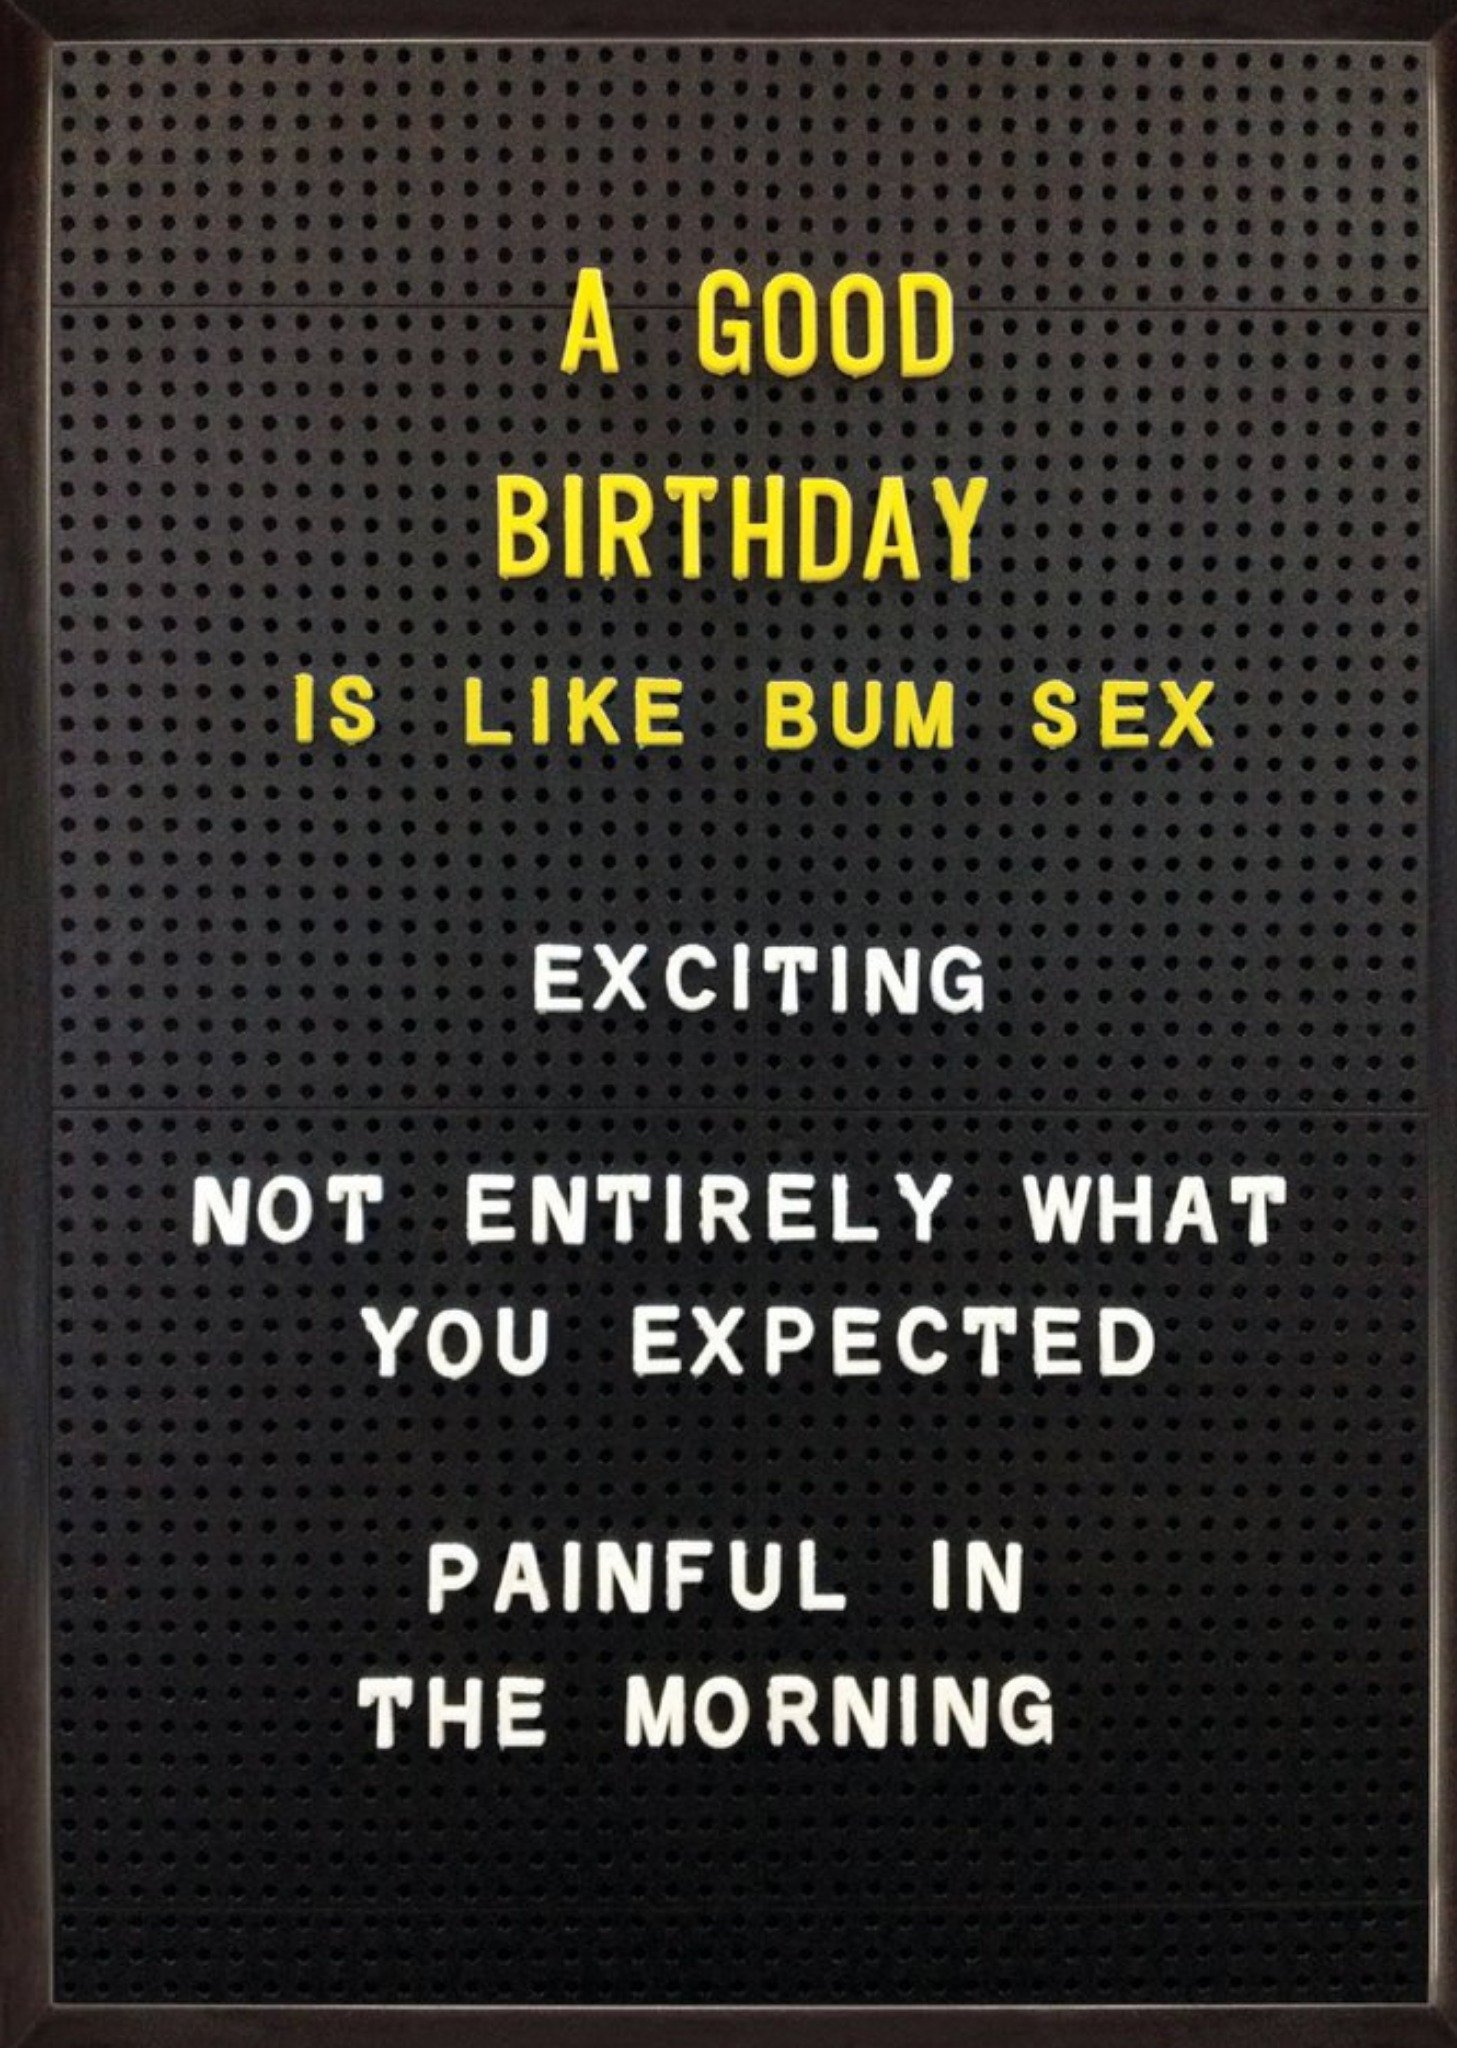 Brainbox Candy Rude Funny A Good Birthday Is Like Bum Sex Card, Large